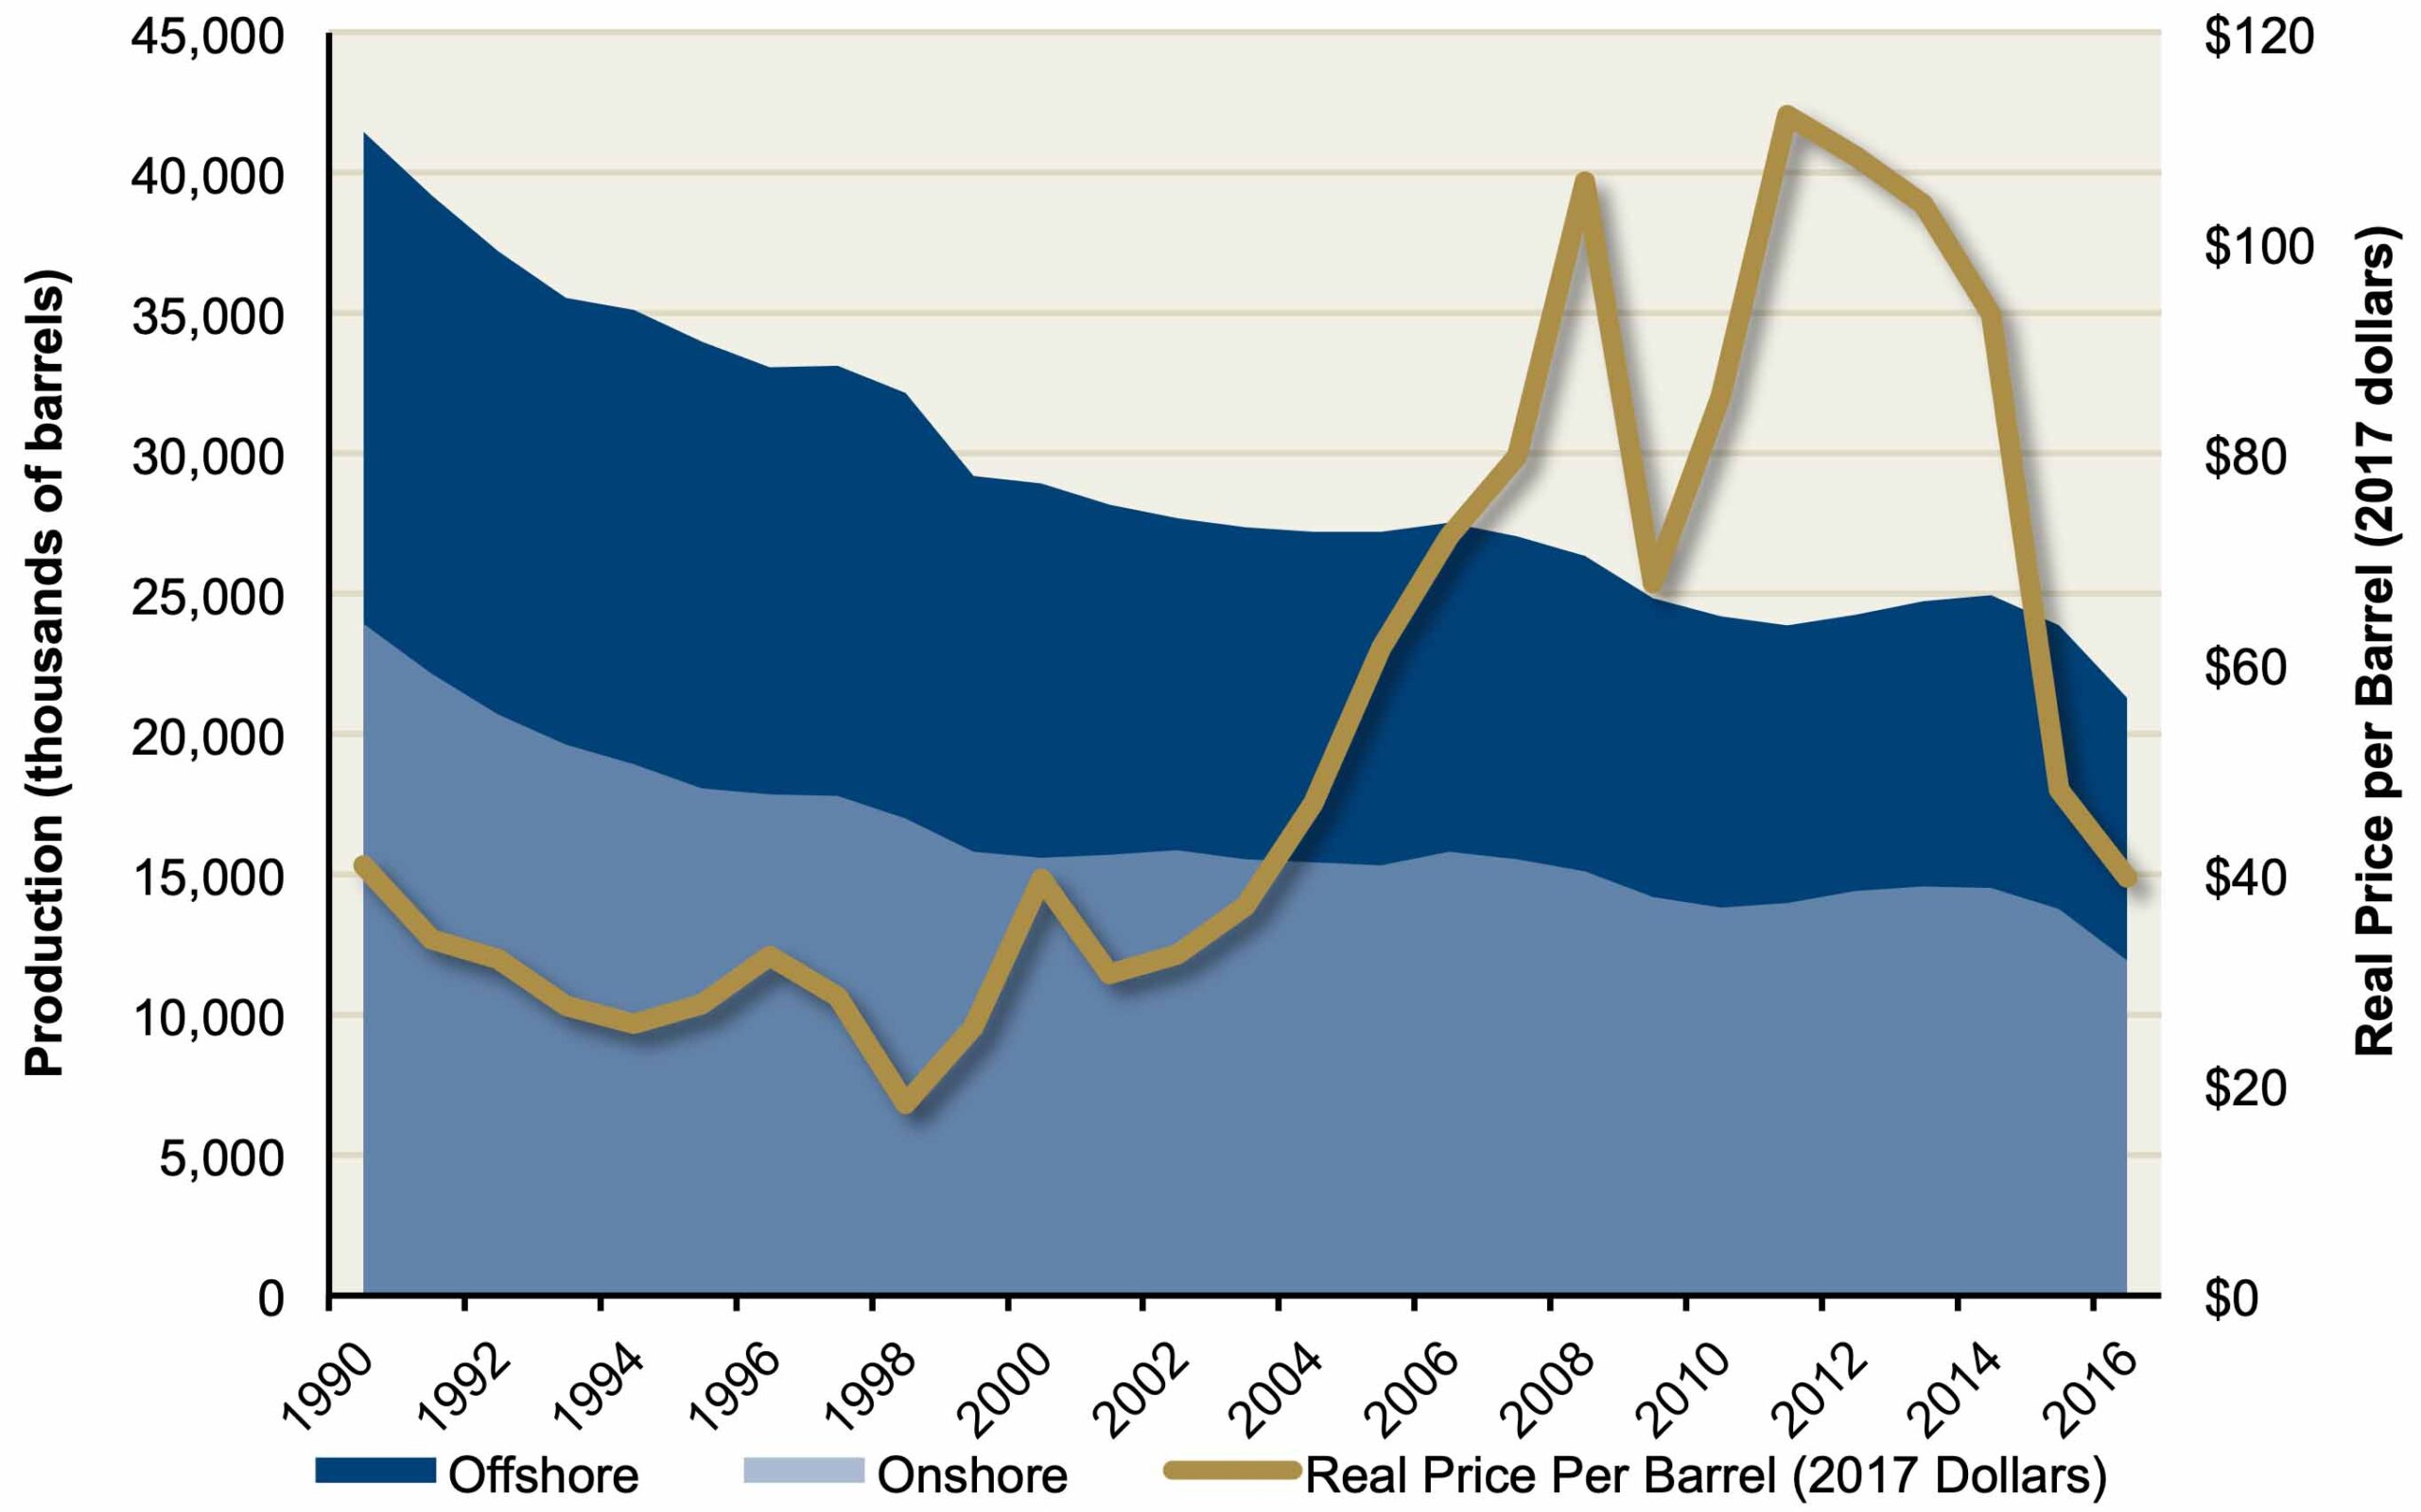 Los Angeles County Annual Onshore/Offshore Oil Production History chart